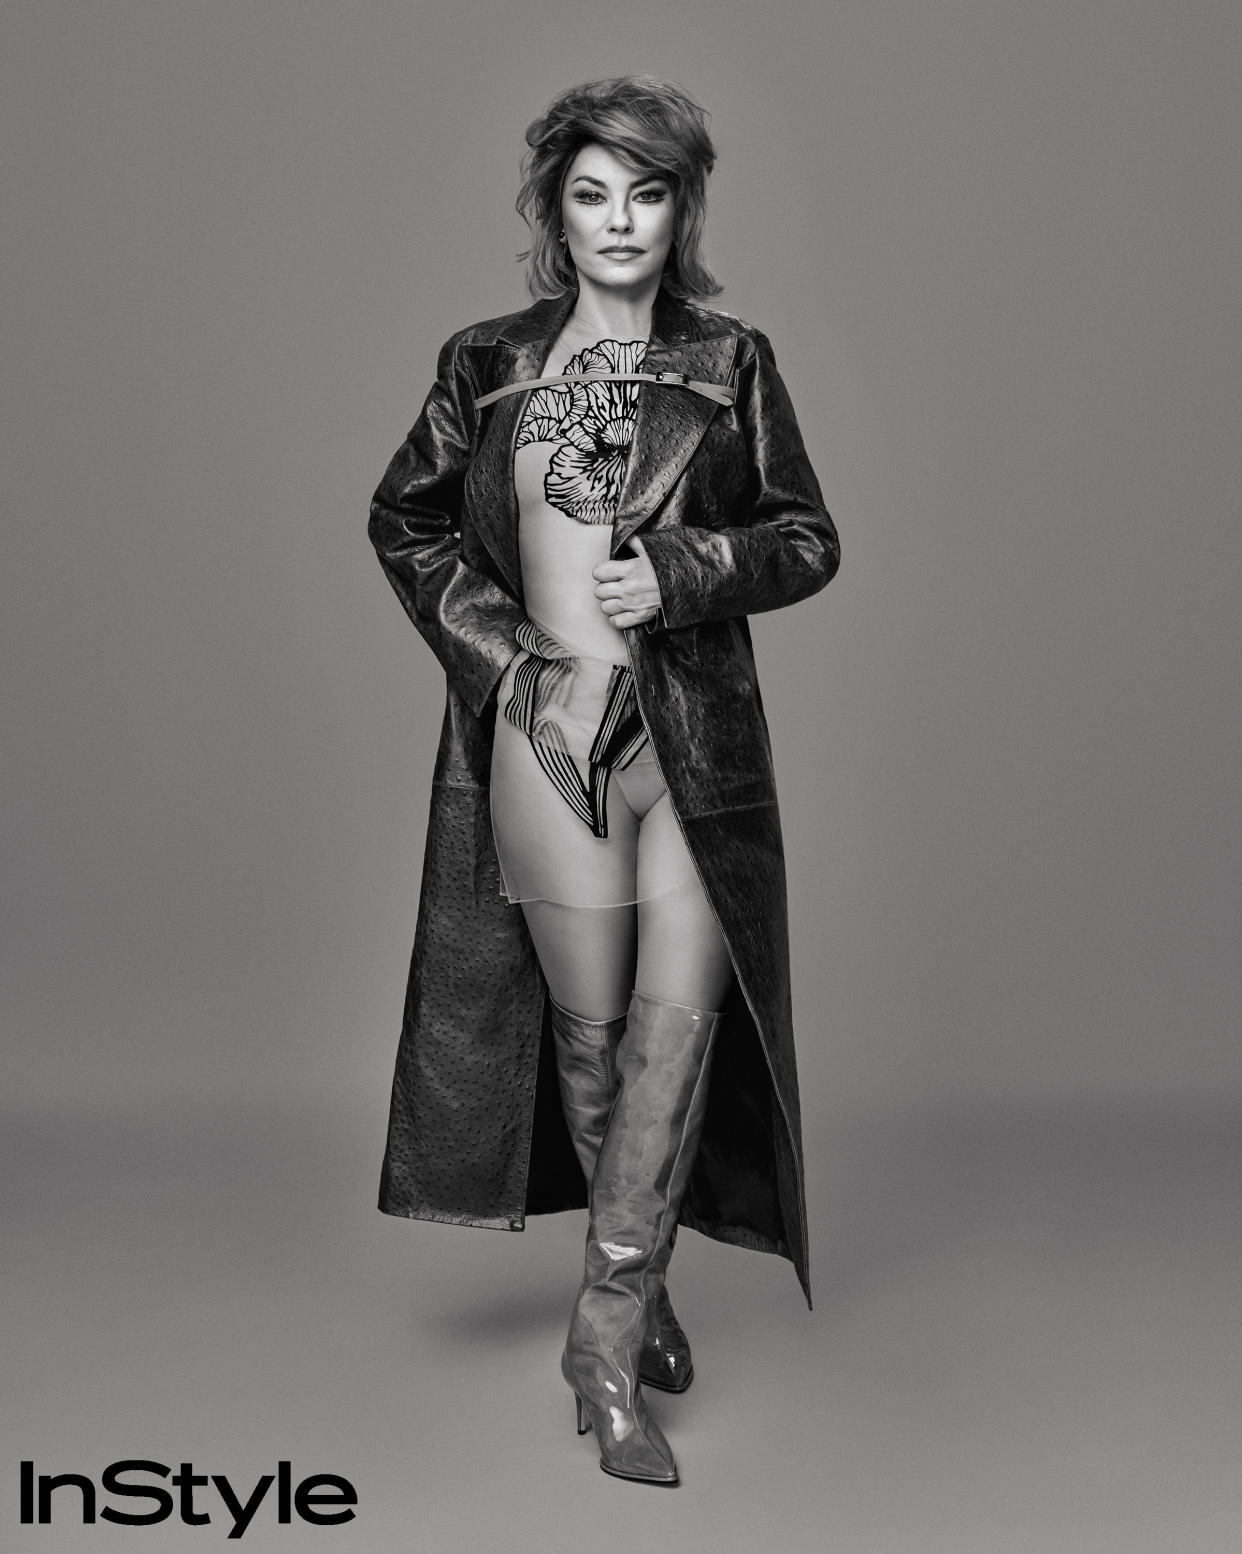 Shania Twain says she has become more fearless with age. (Photo: InStyle;Danielle Levitt)